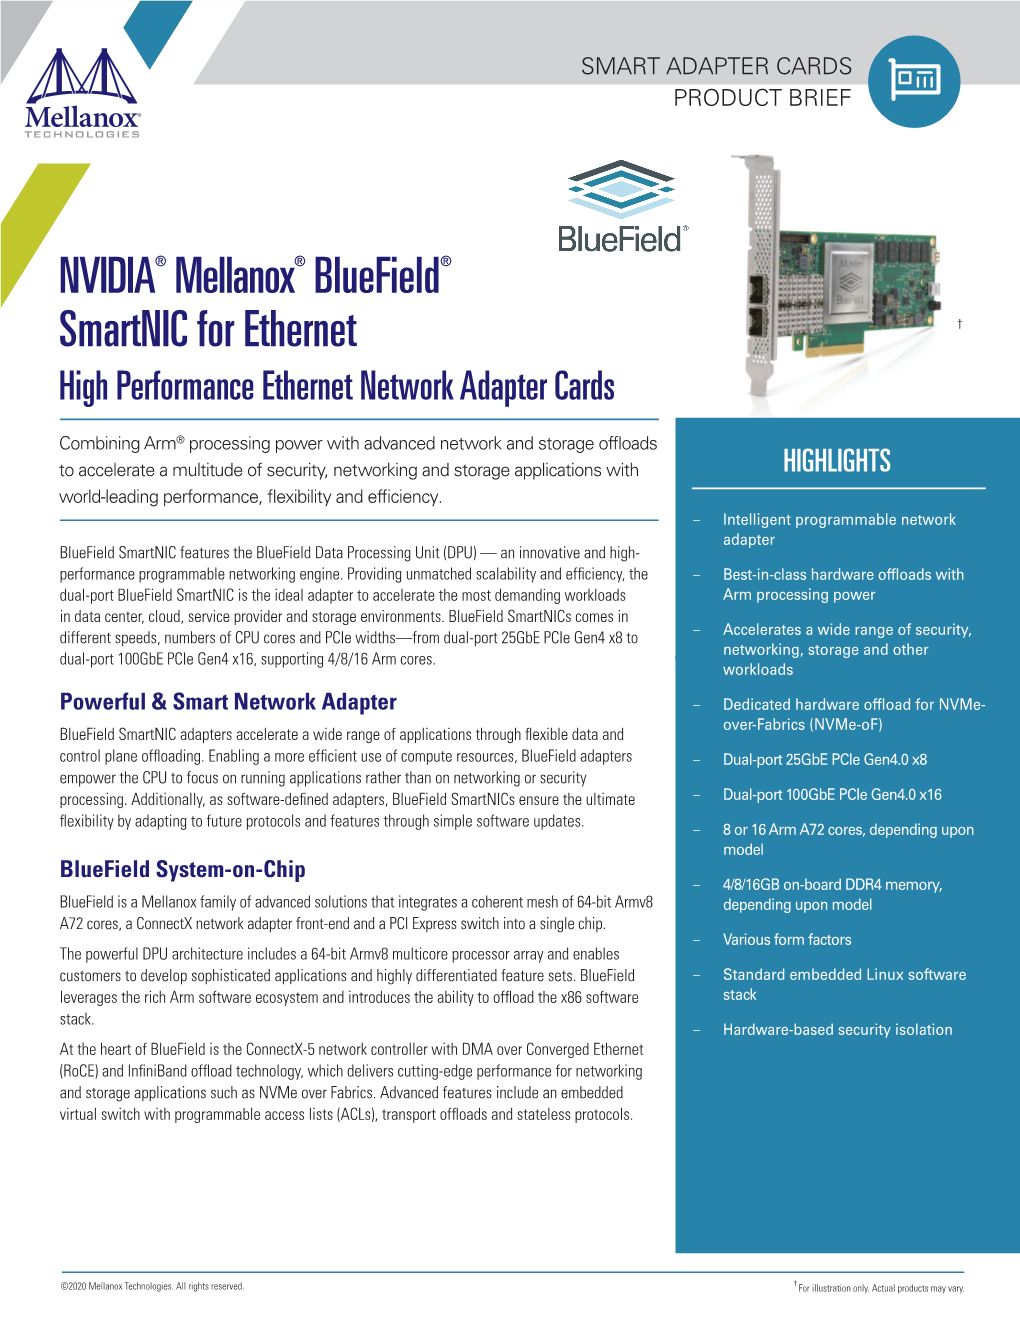 NVIDIA® Mellanox® Bluefield® Smartnic for Ethernet † High Performance Ethernet Network Adapter Cards